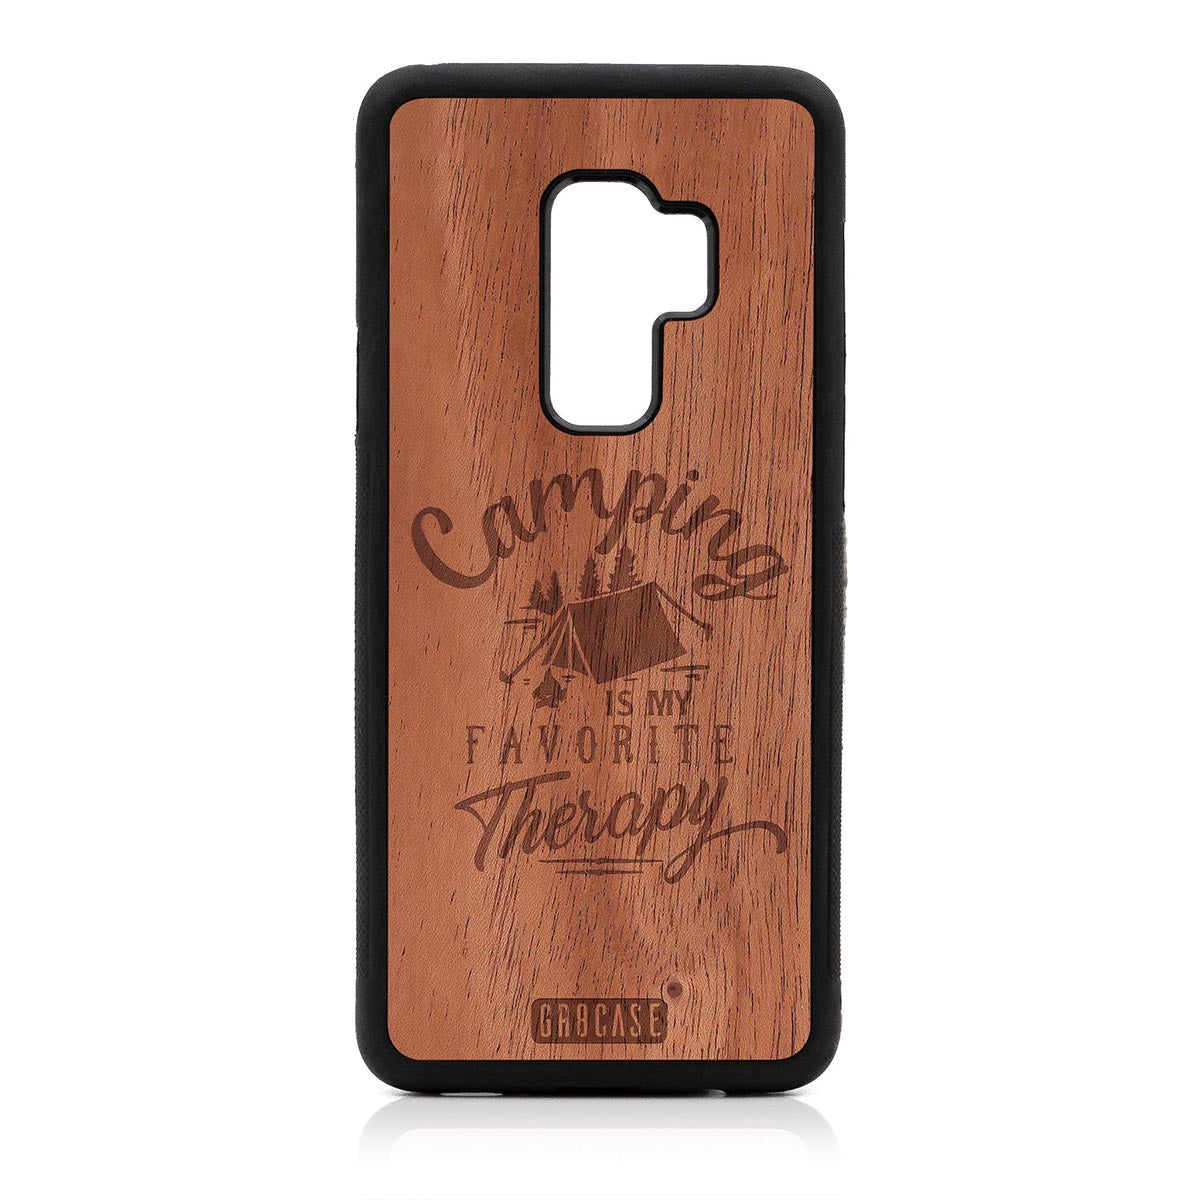 Camping Is My Favorite Therapy Design Wood Case For Samsung Galaxy S9 Plus by GR8CASE